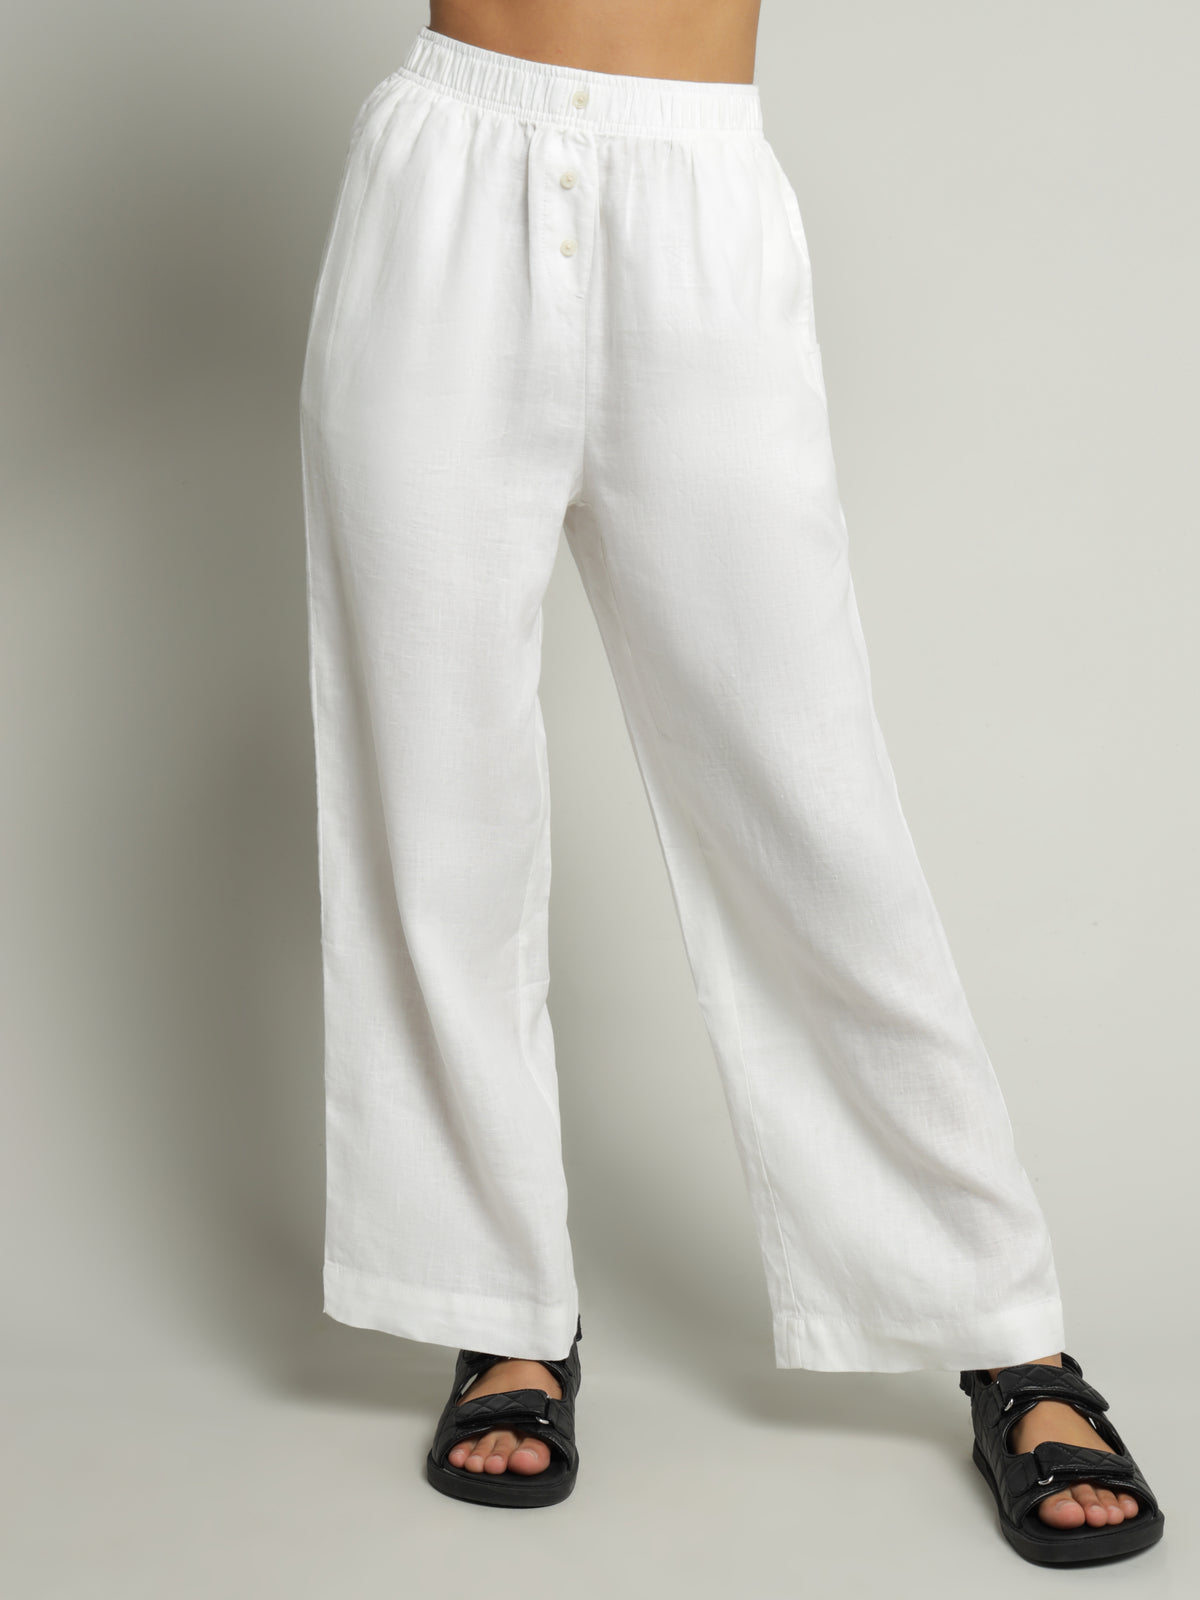 Nude Lounge Linen Pants in White